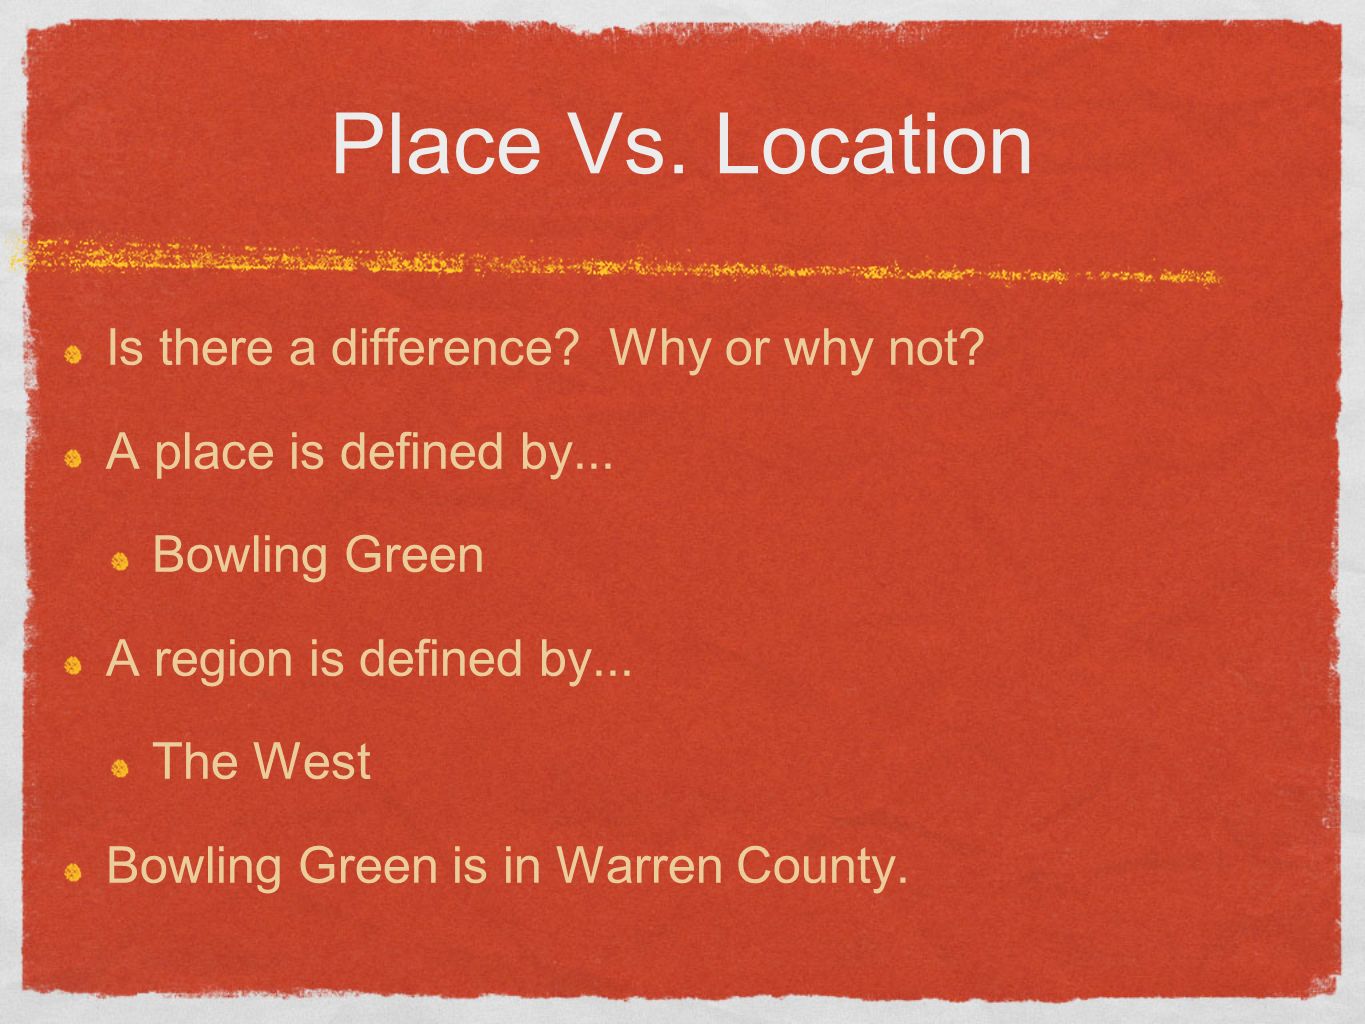 The difference between place and location nfl mvp betting